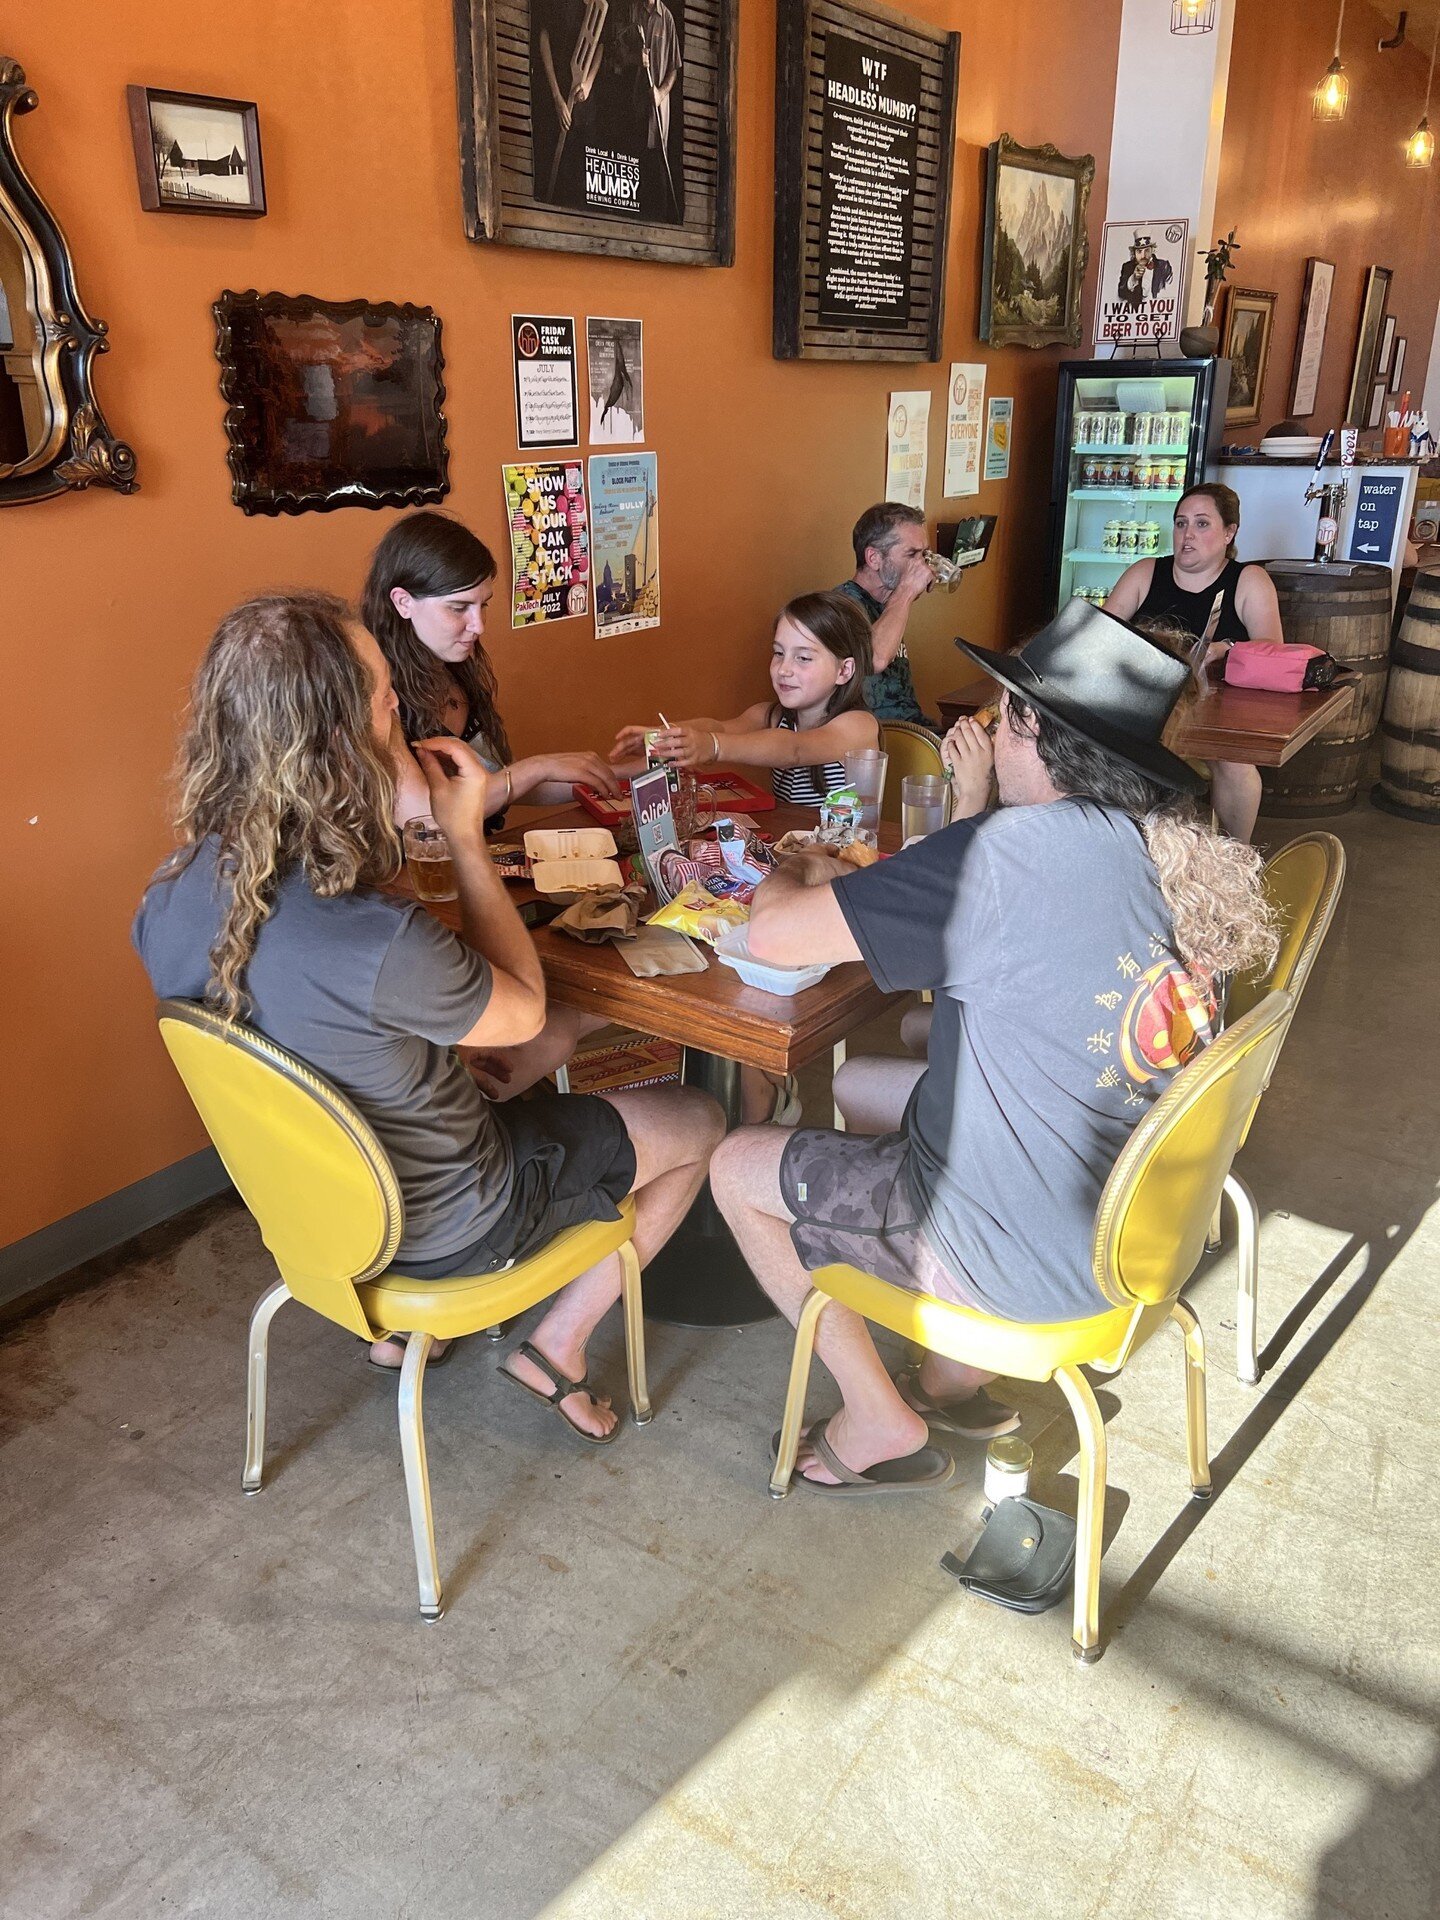 Good beer, good friends, good conversation - In the words of the great Chandler Bing, &quot;Does it GET any better?&quot;
.
.
.
.
.
#headlessmumbybrewing #headlessbeermaking #microbrewperfection #verysmallbreweryaward #beersweliketopeoplewelove #lage